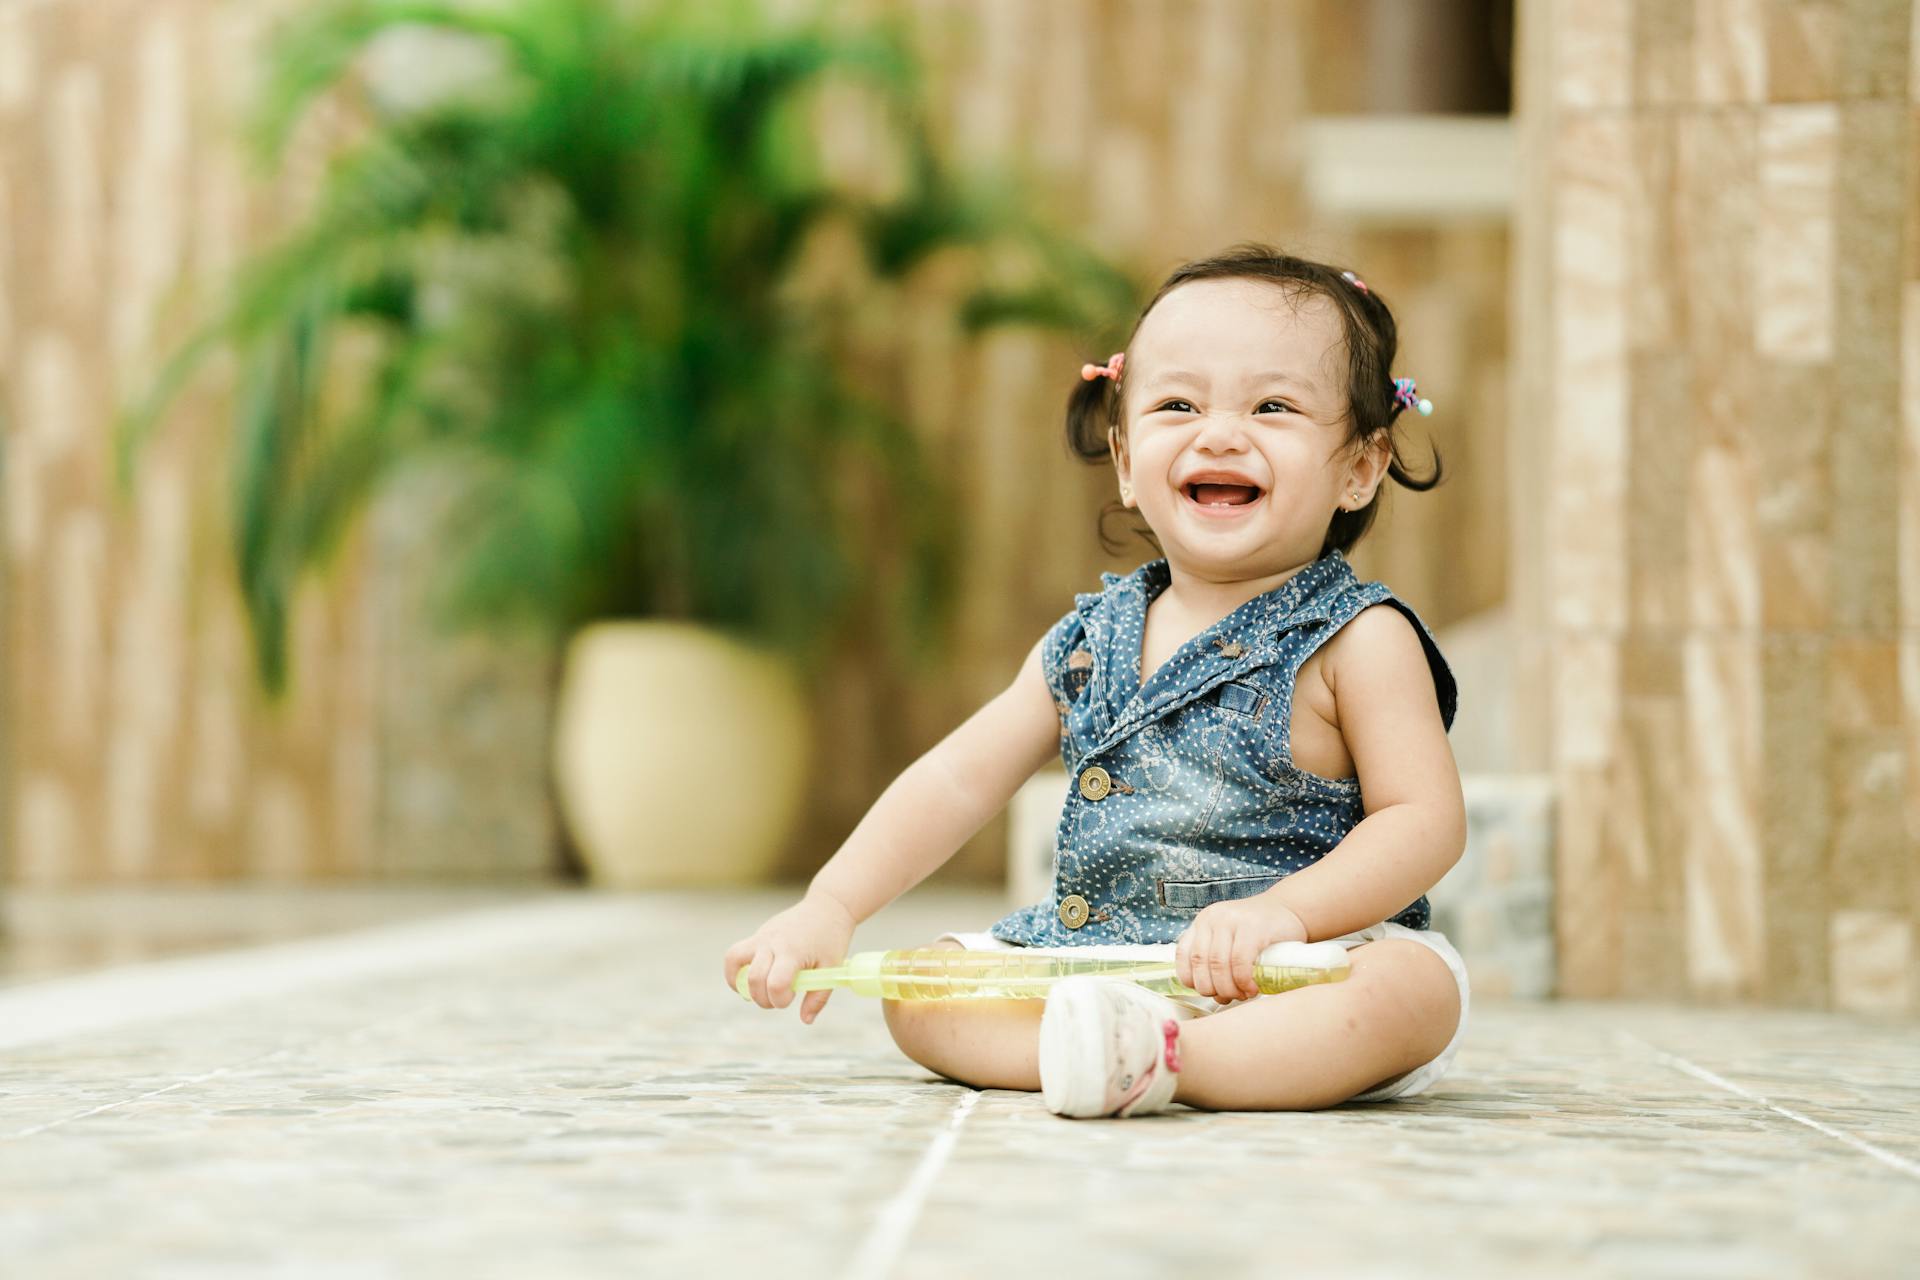 A smiling little girl | Source: Pexels